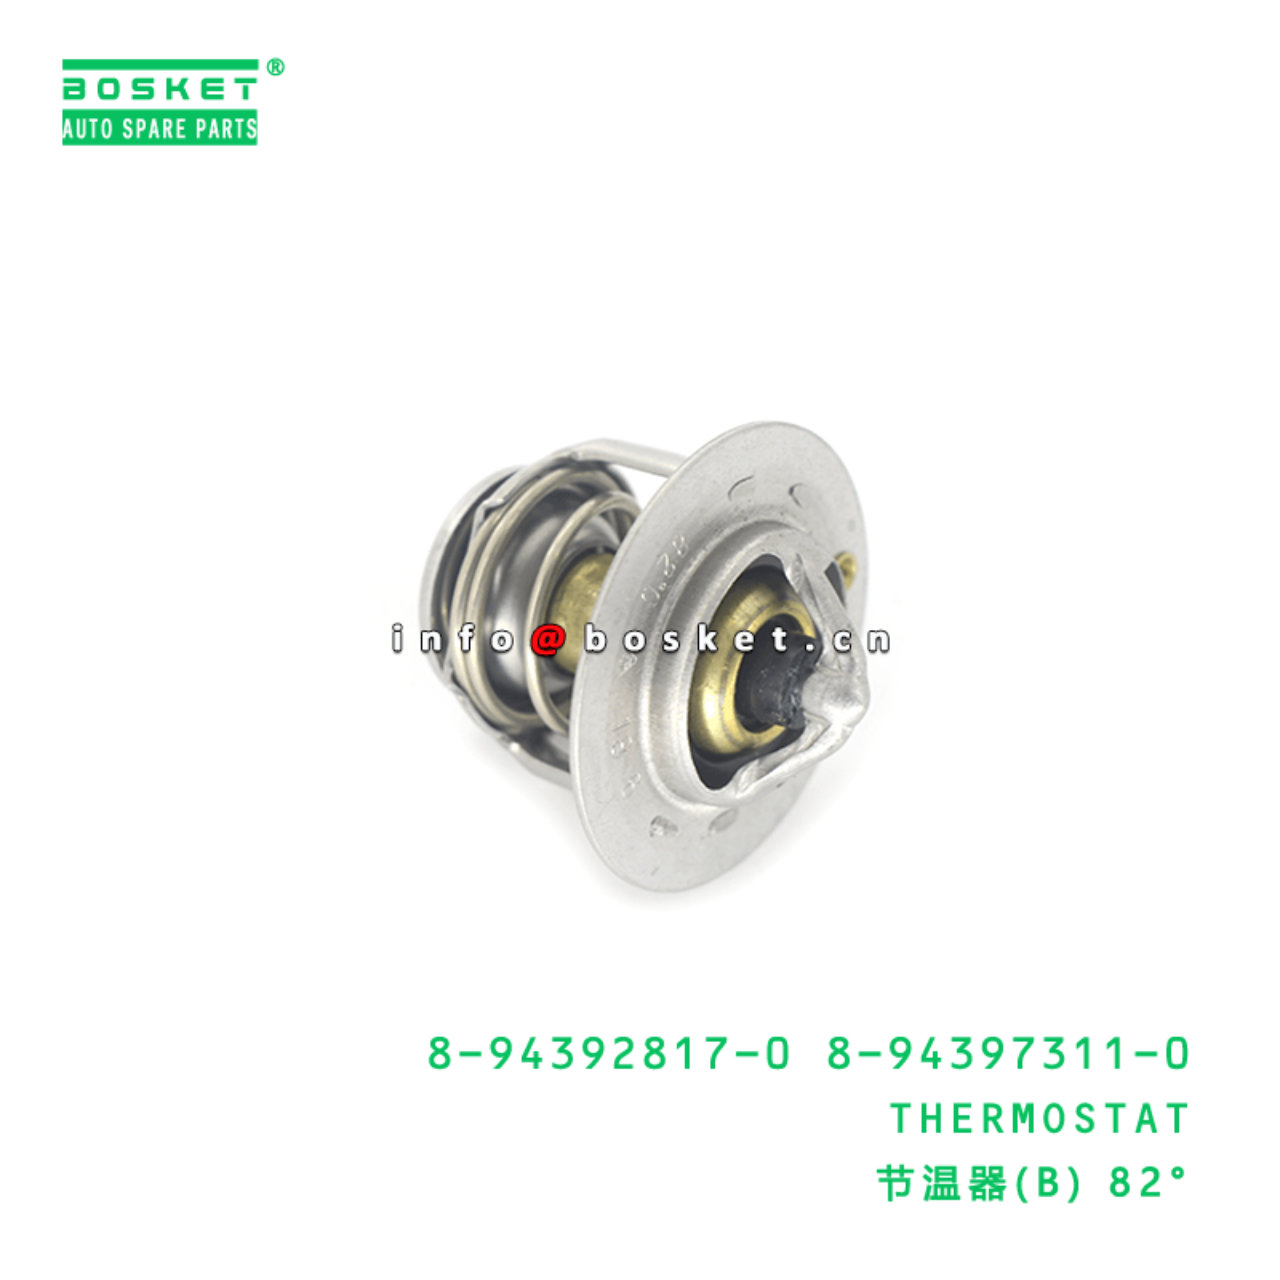 8-94392817-0 8-94397311-0 Thermostat 8943928170 8943973110 Suitable for ISUZU FVR32 6HE1